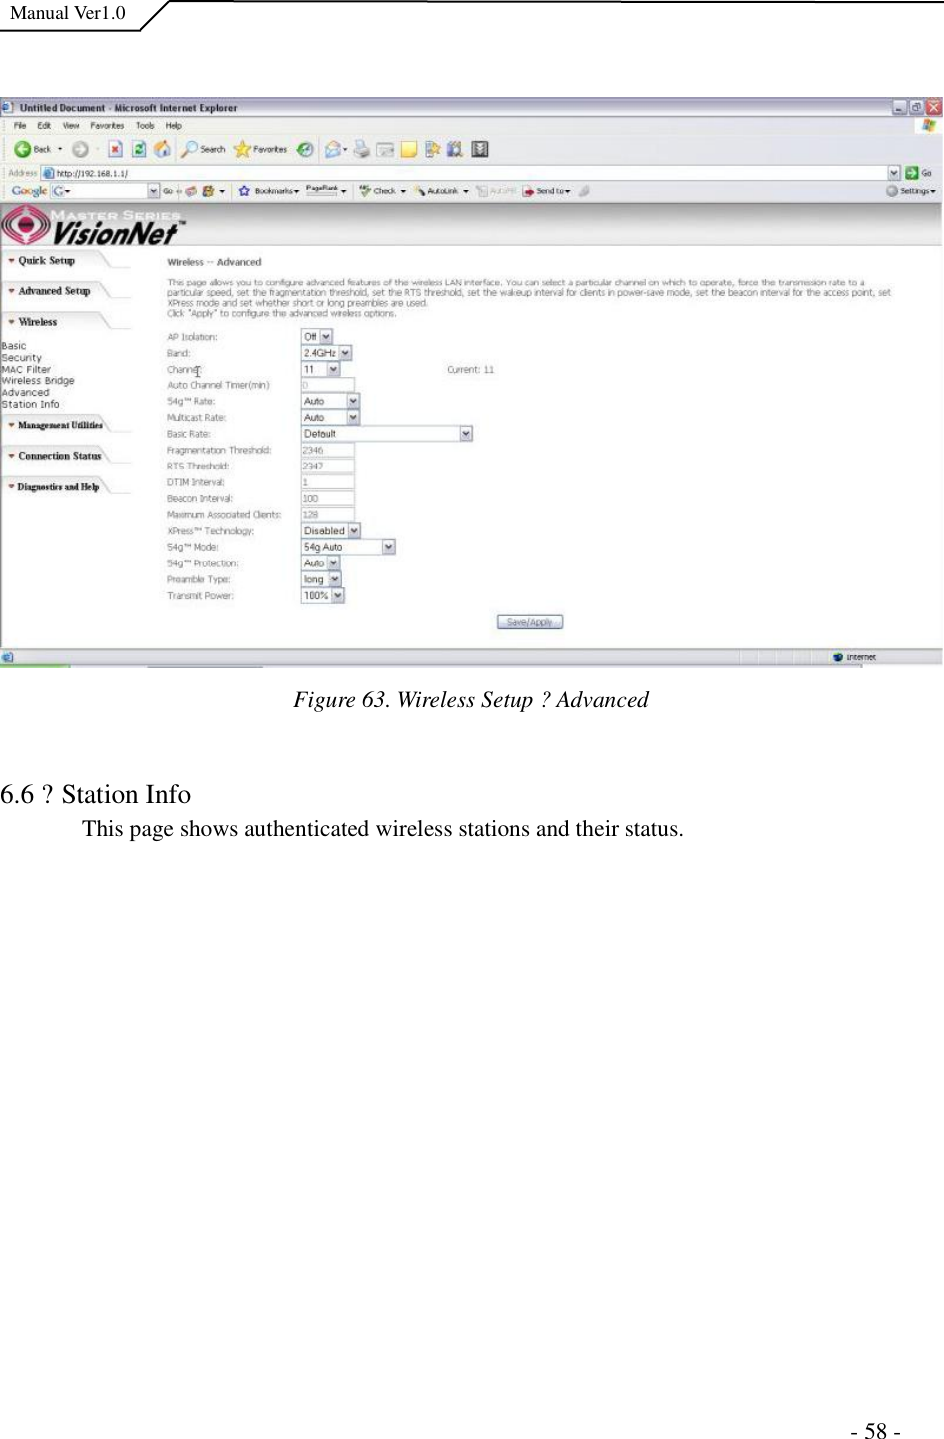  Manual Ver1.0 Figure 63. Wireless Setup ?Advanced 6.6 ?Station Info This page shows authenticated wireless stations and their status.                                                                      - 58 - 